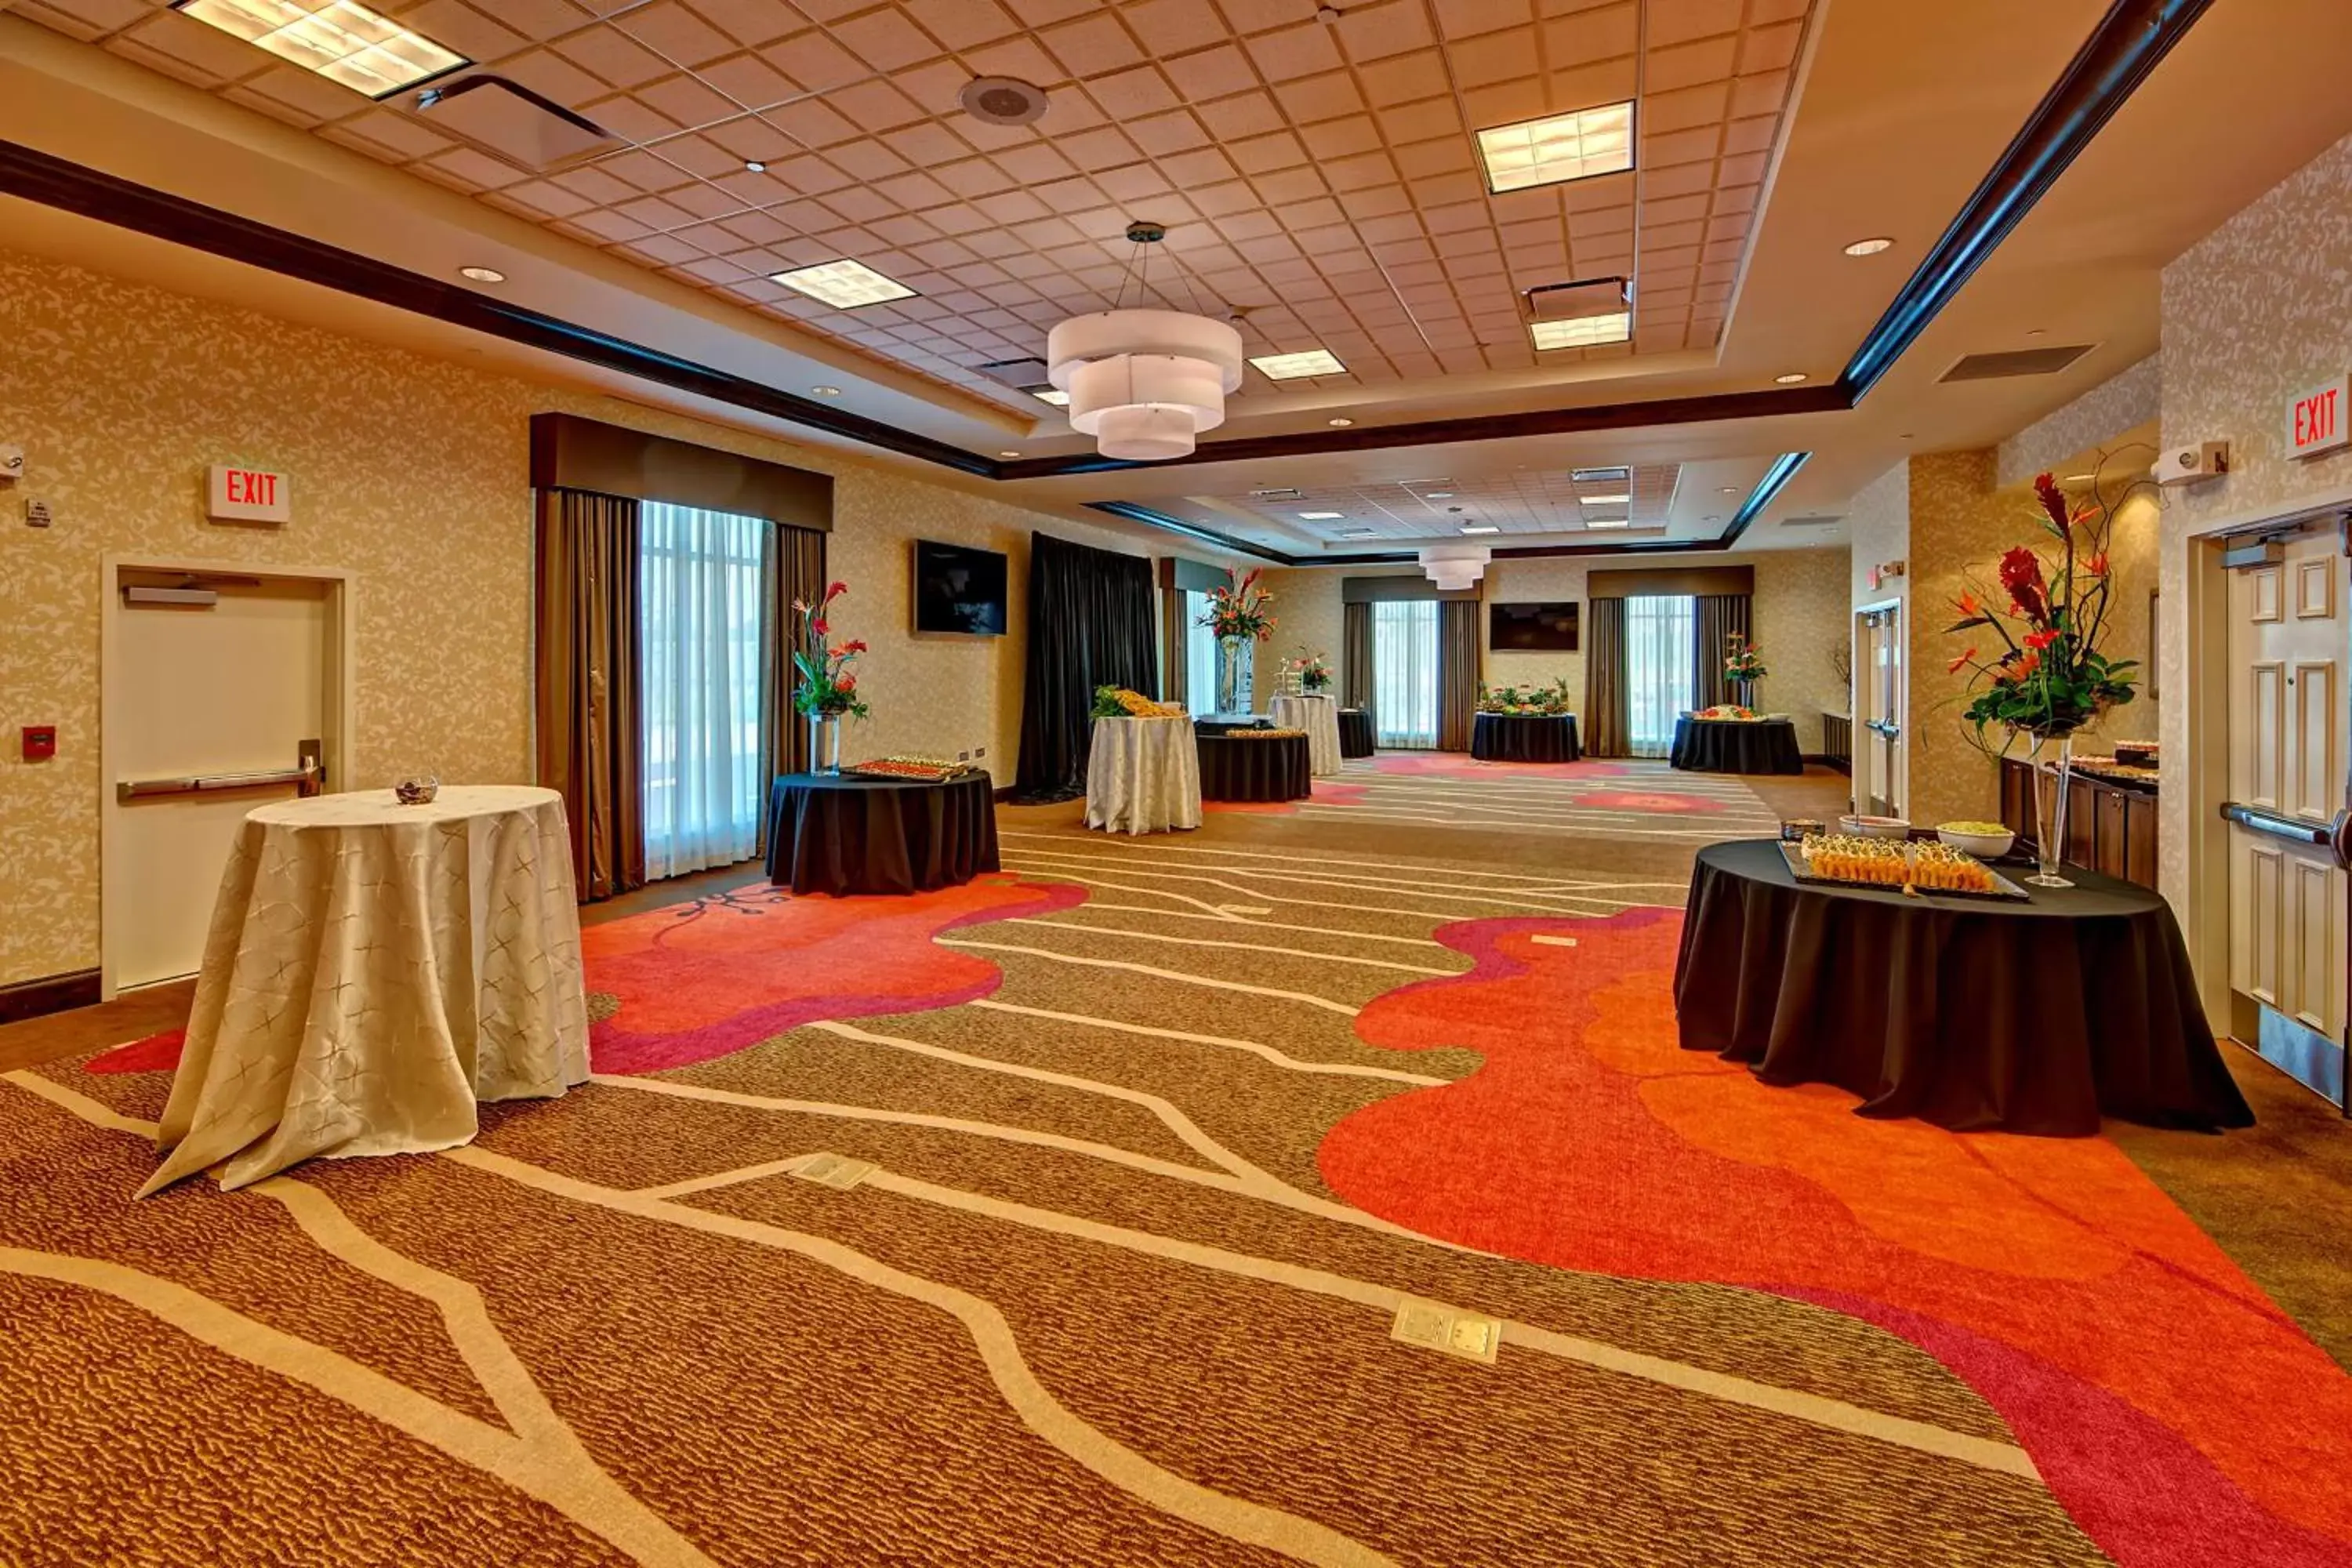 Meeting/conference room, Banquet Facilities in Hilton Garden Inn Memphis/Wolfchase Galleria